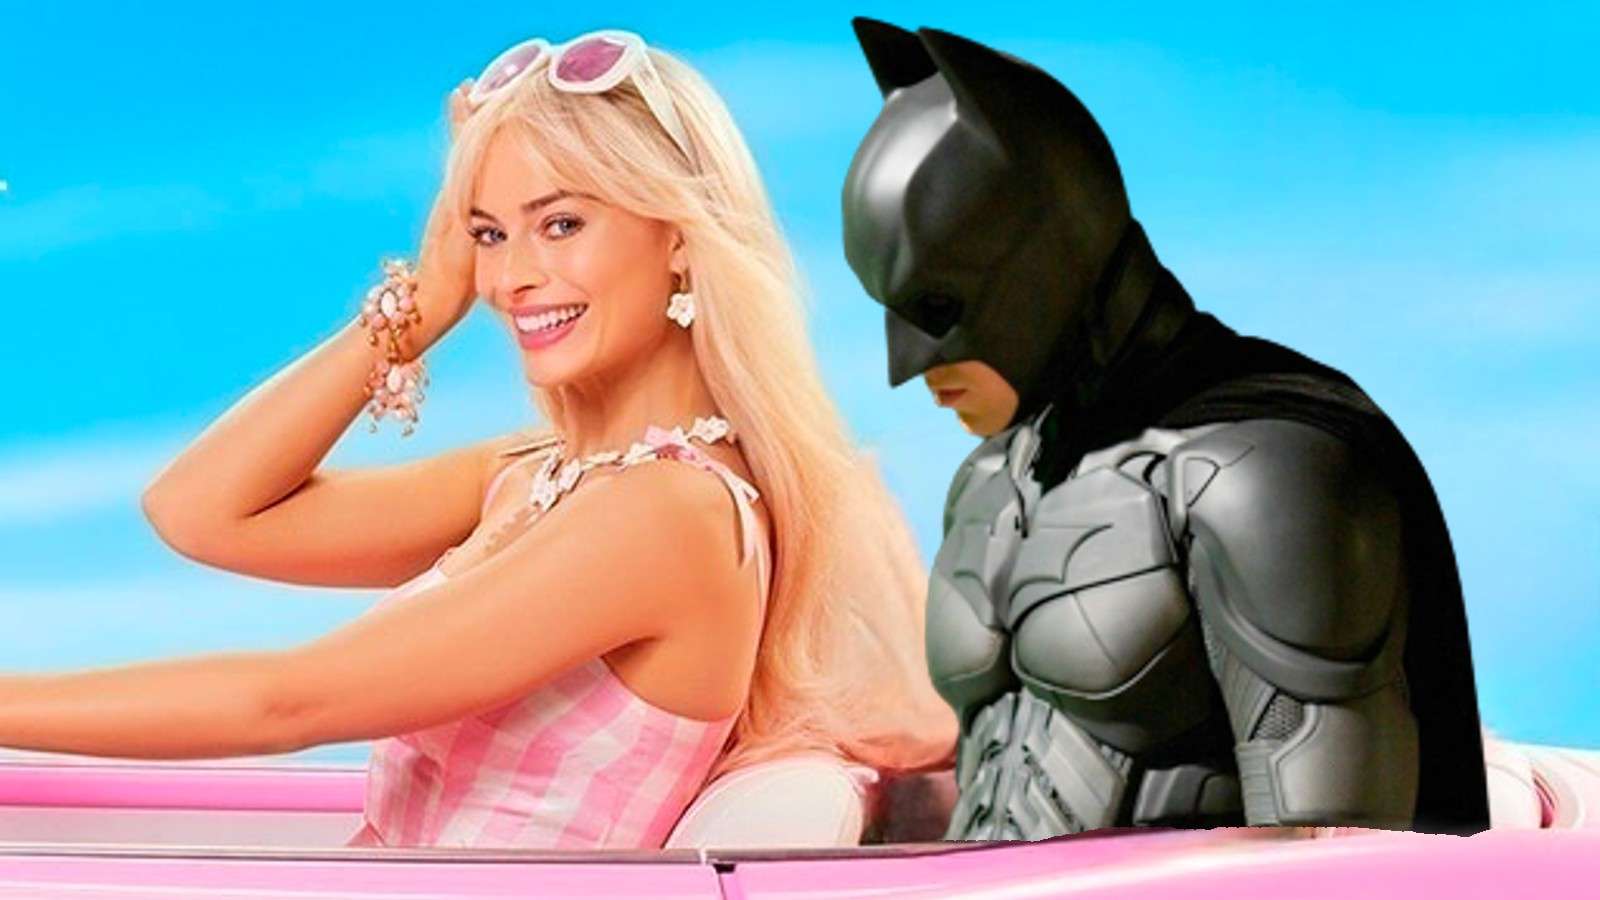 The poster for Barbie and Batman from The Dark Knight